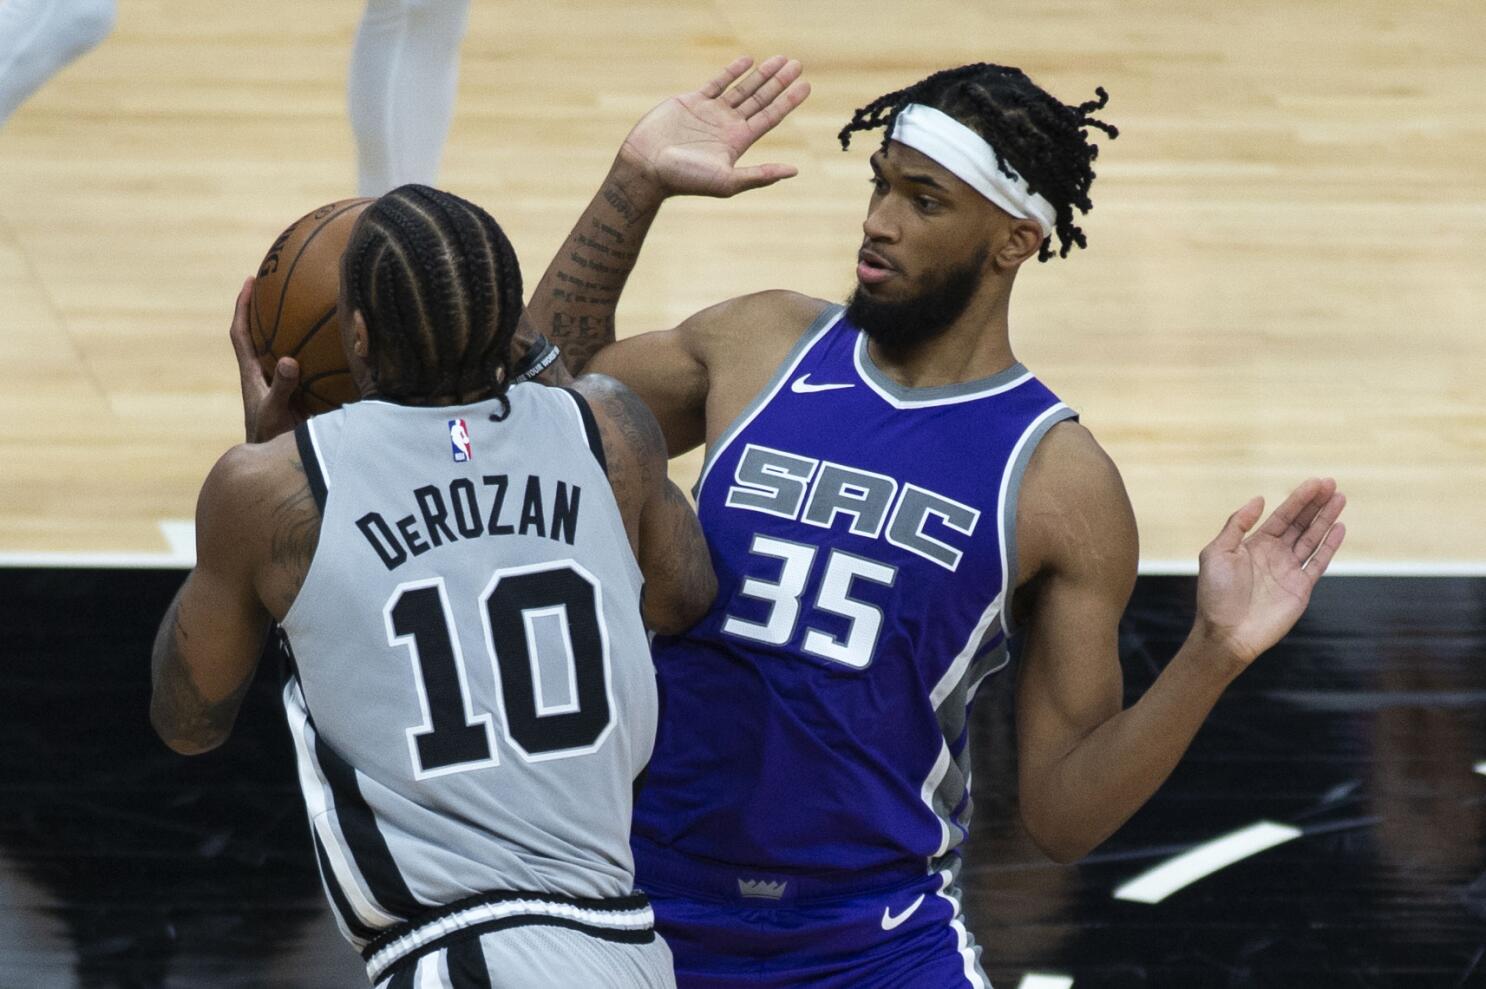 Tyrese Time: Kings' Haliburton likely out for season with knee injury